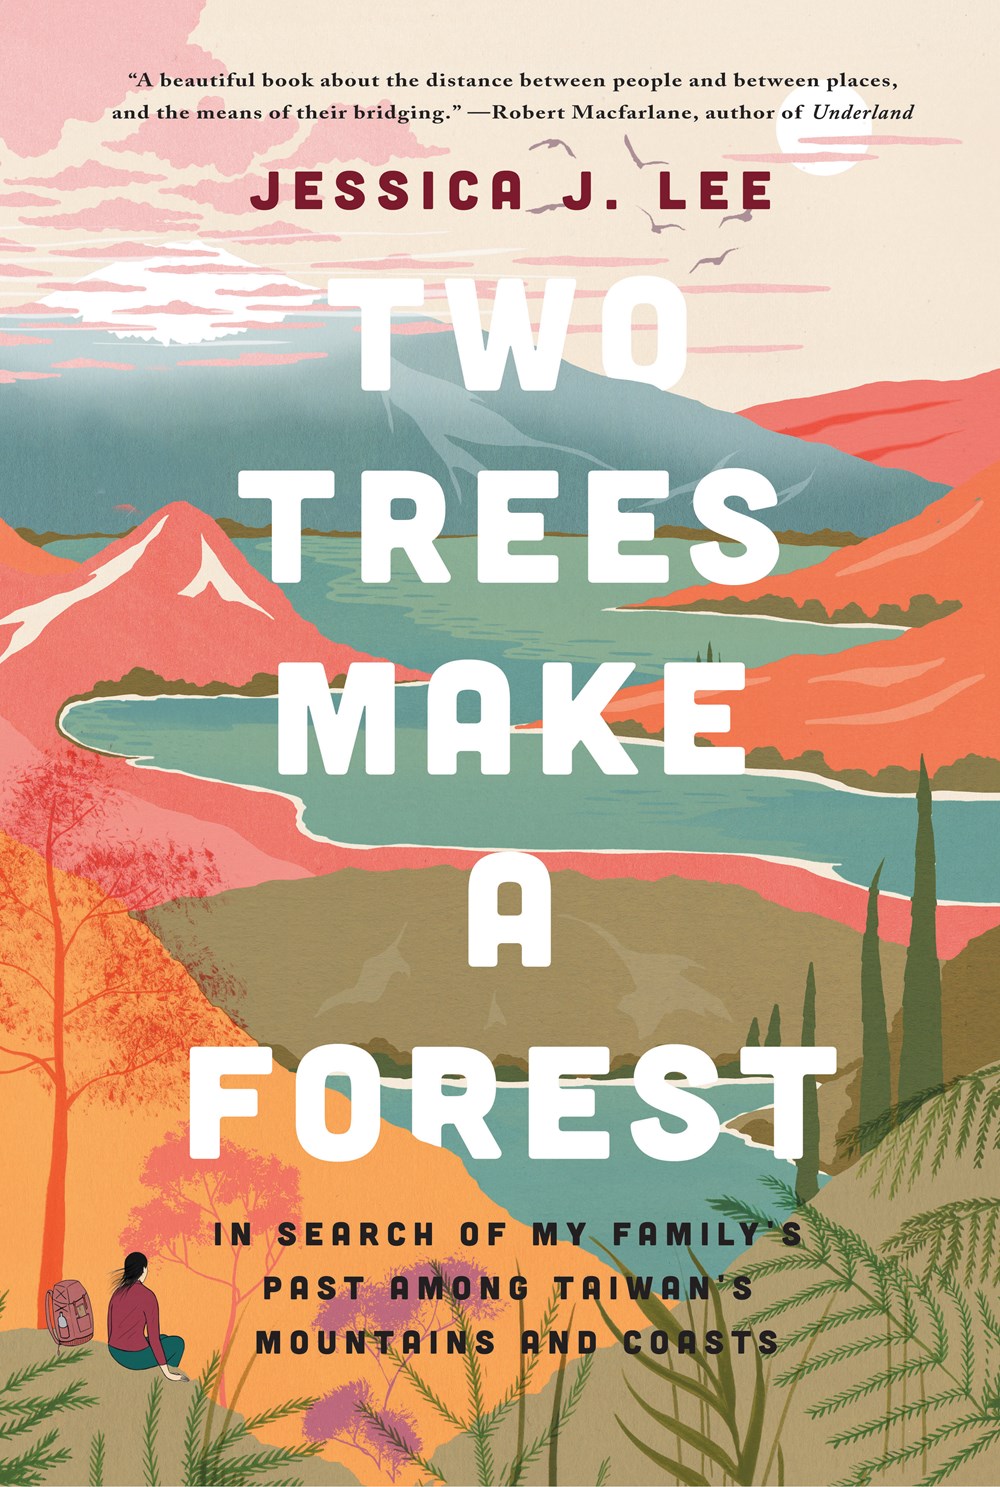 Image for "Two Trees Make a Forest"